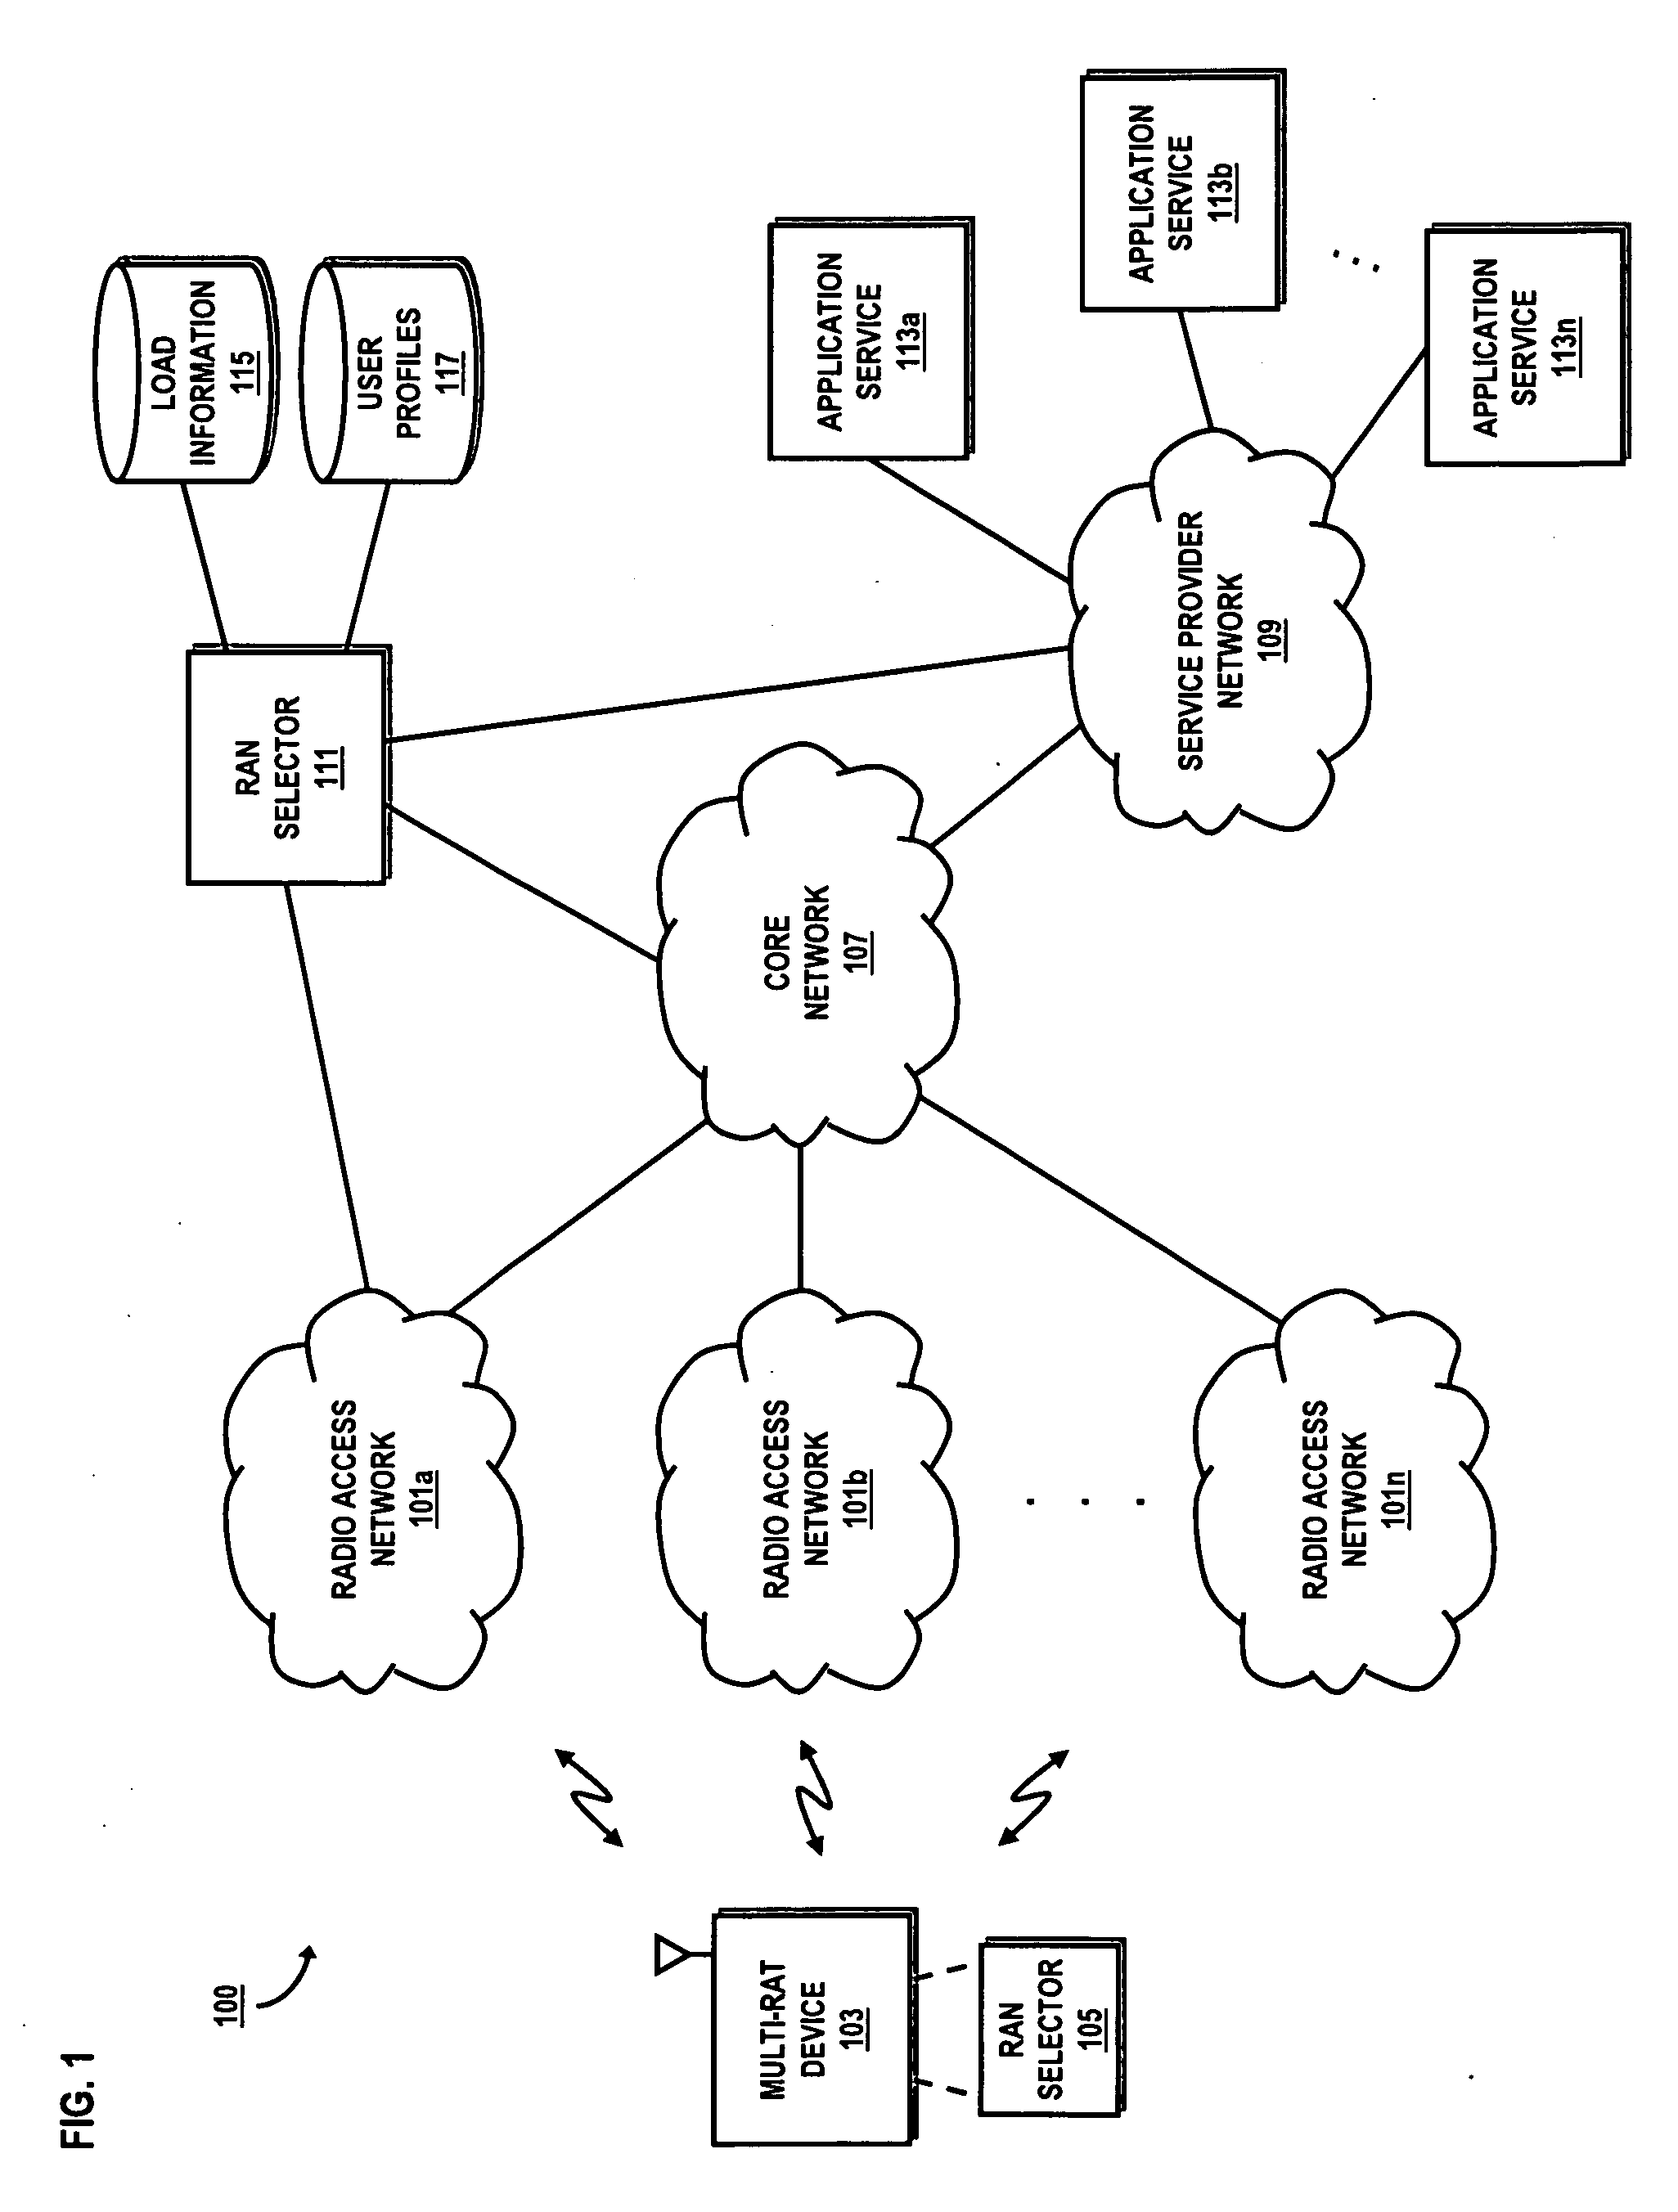 Method and system for load-balancing across multiple access networks